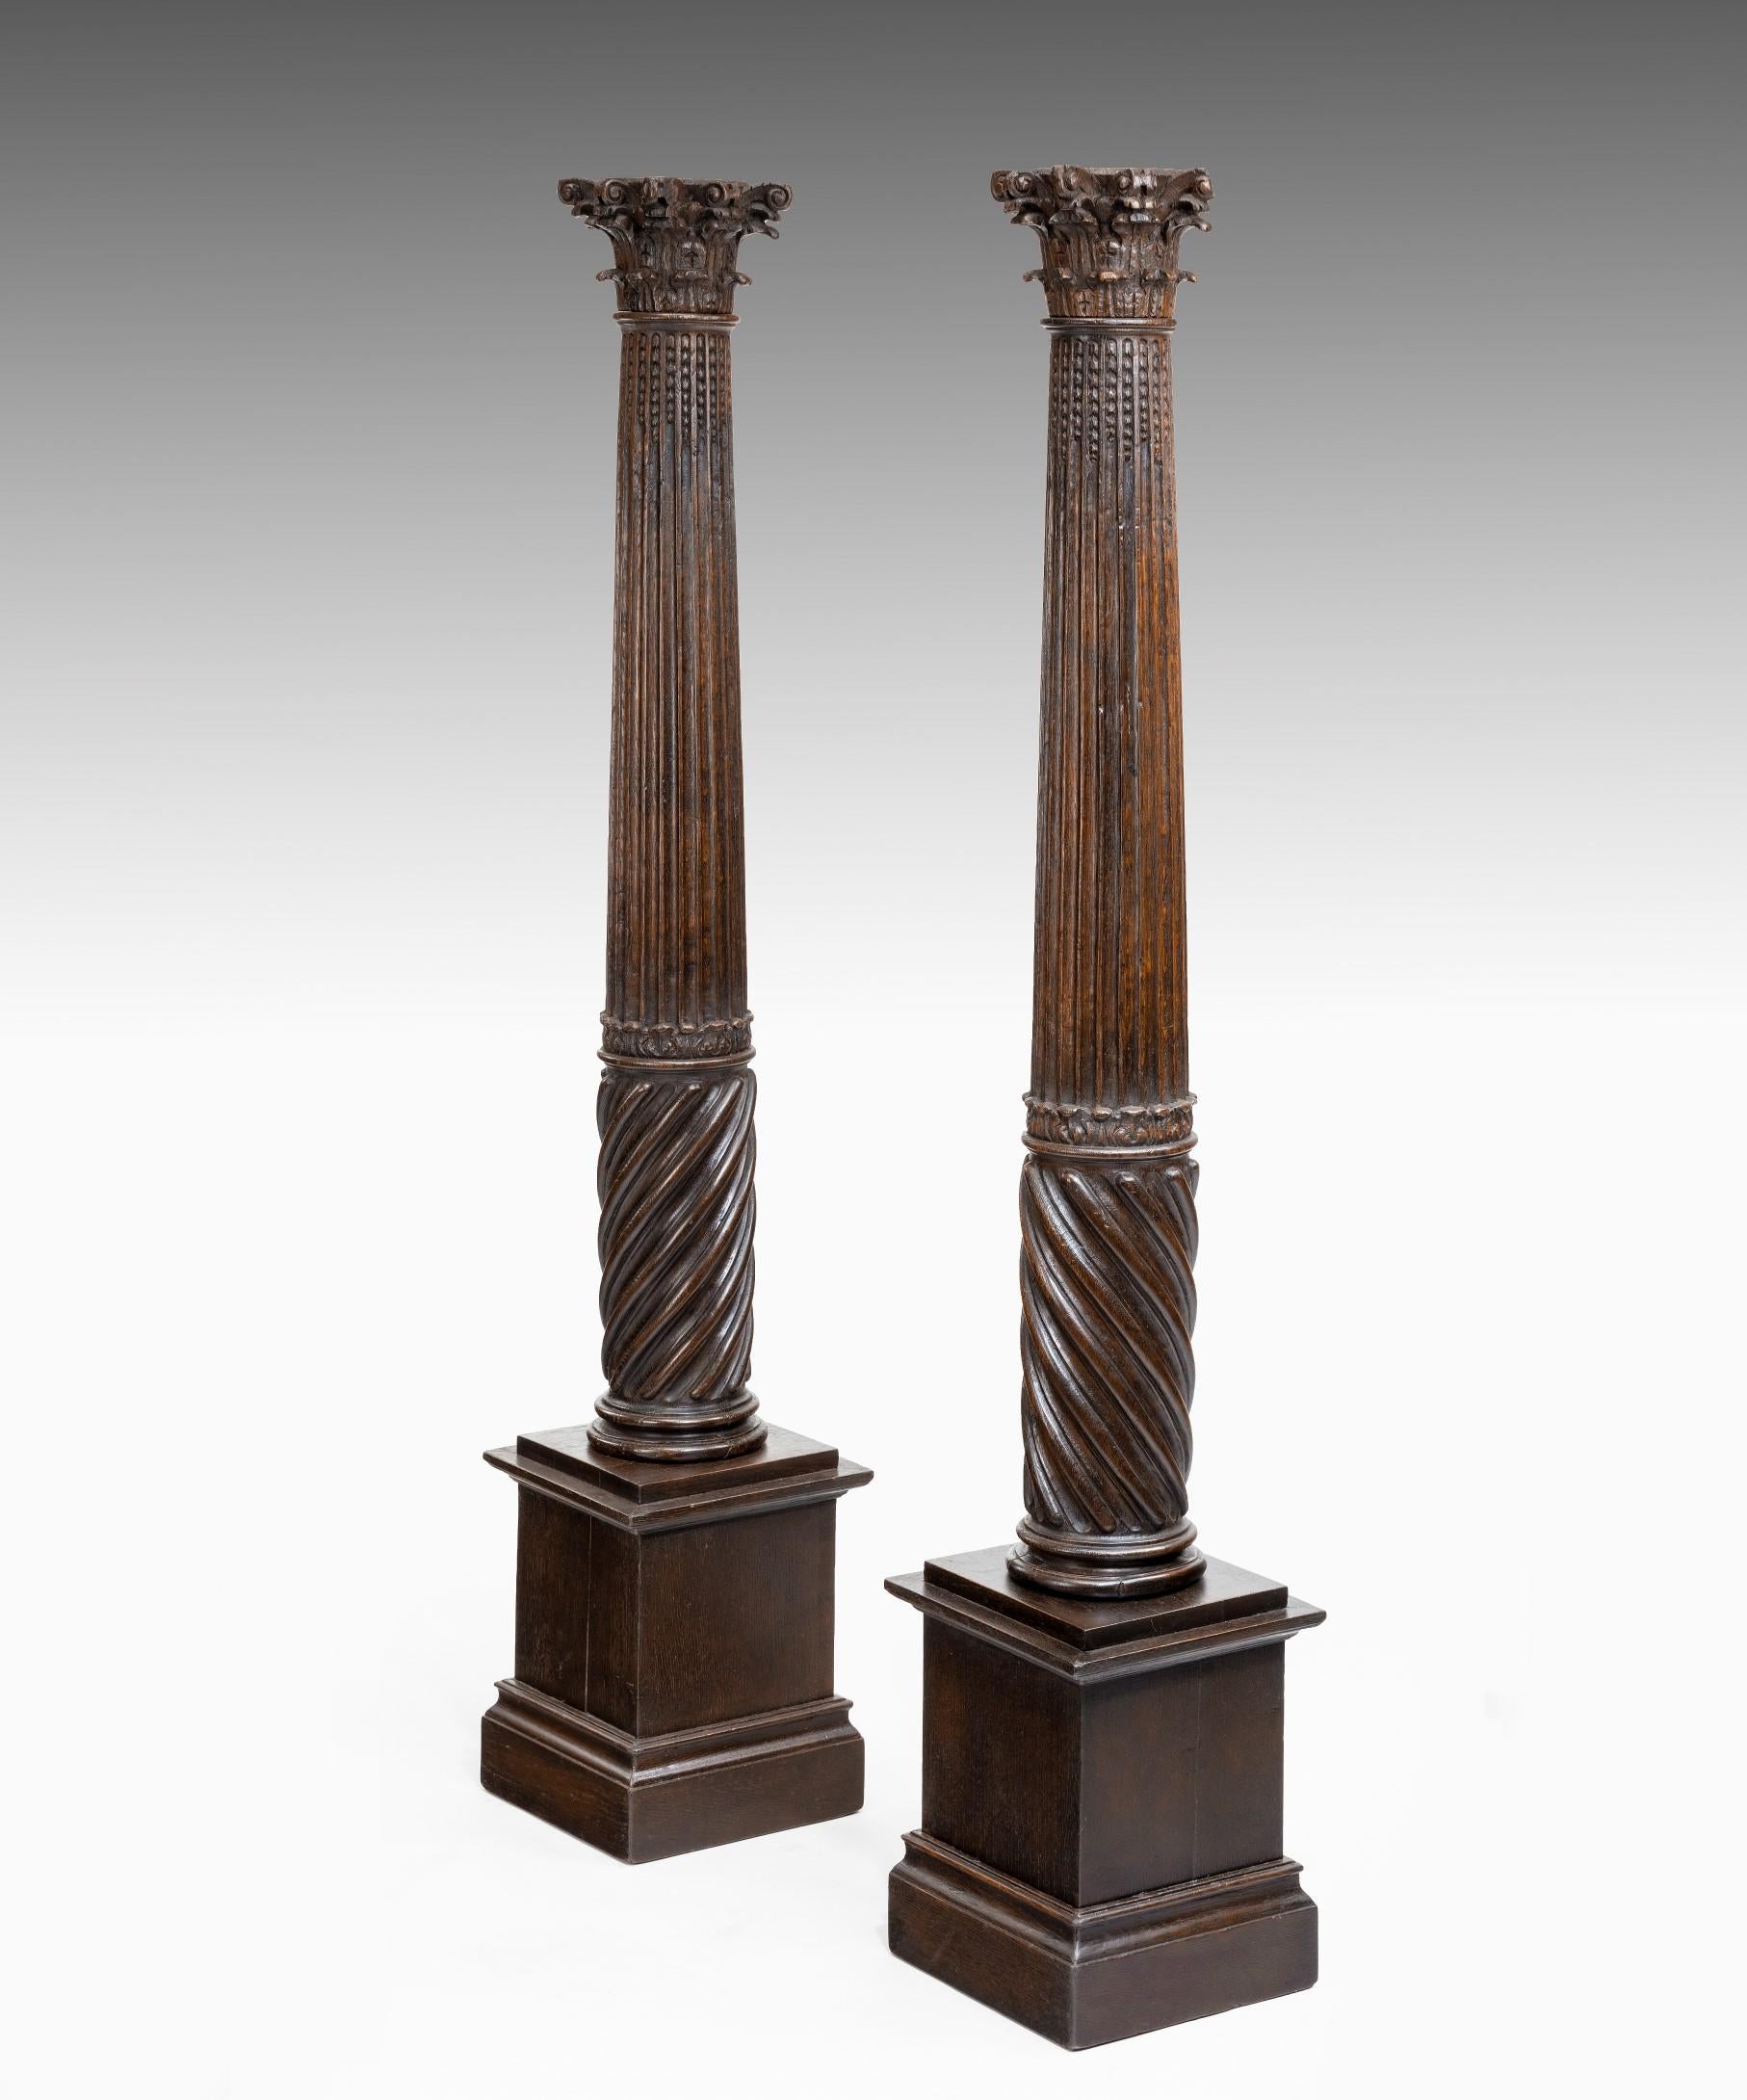 A wonderfully atmospheric pair of 17th century carved oak columns; the composite capital raised on a fluted and spiral turned column which terminates in a modern pedestal base.